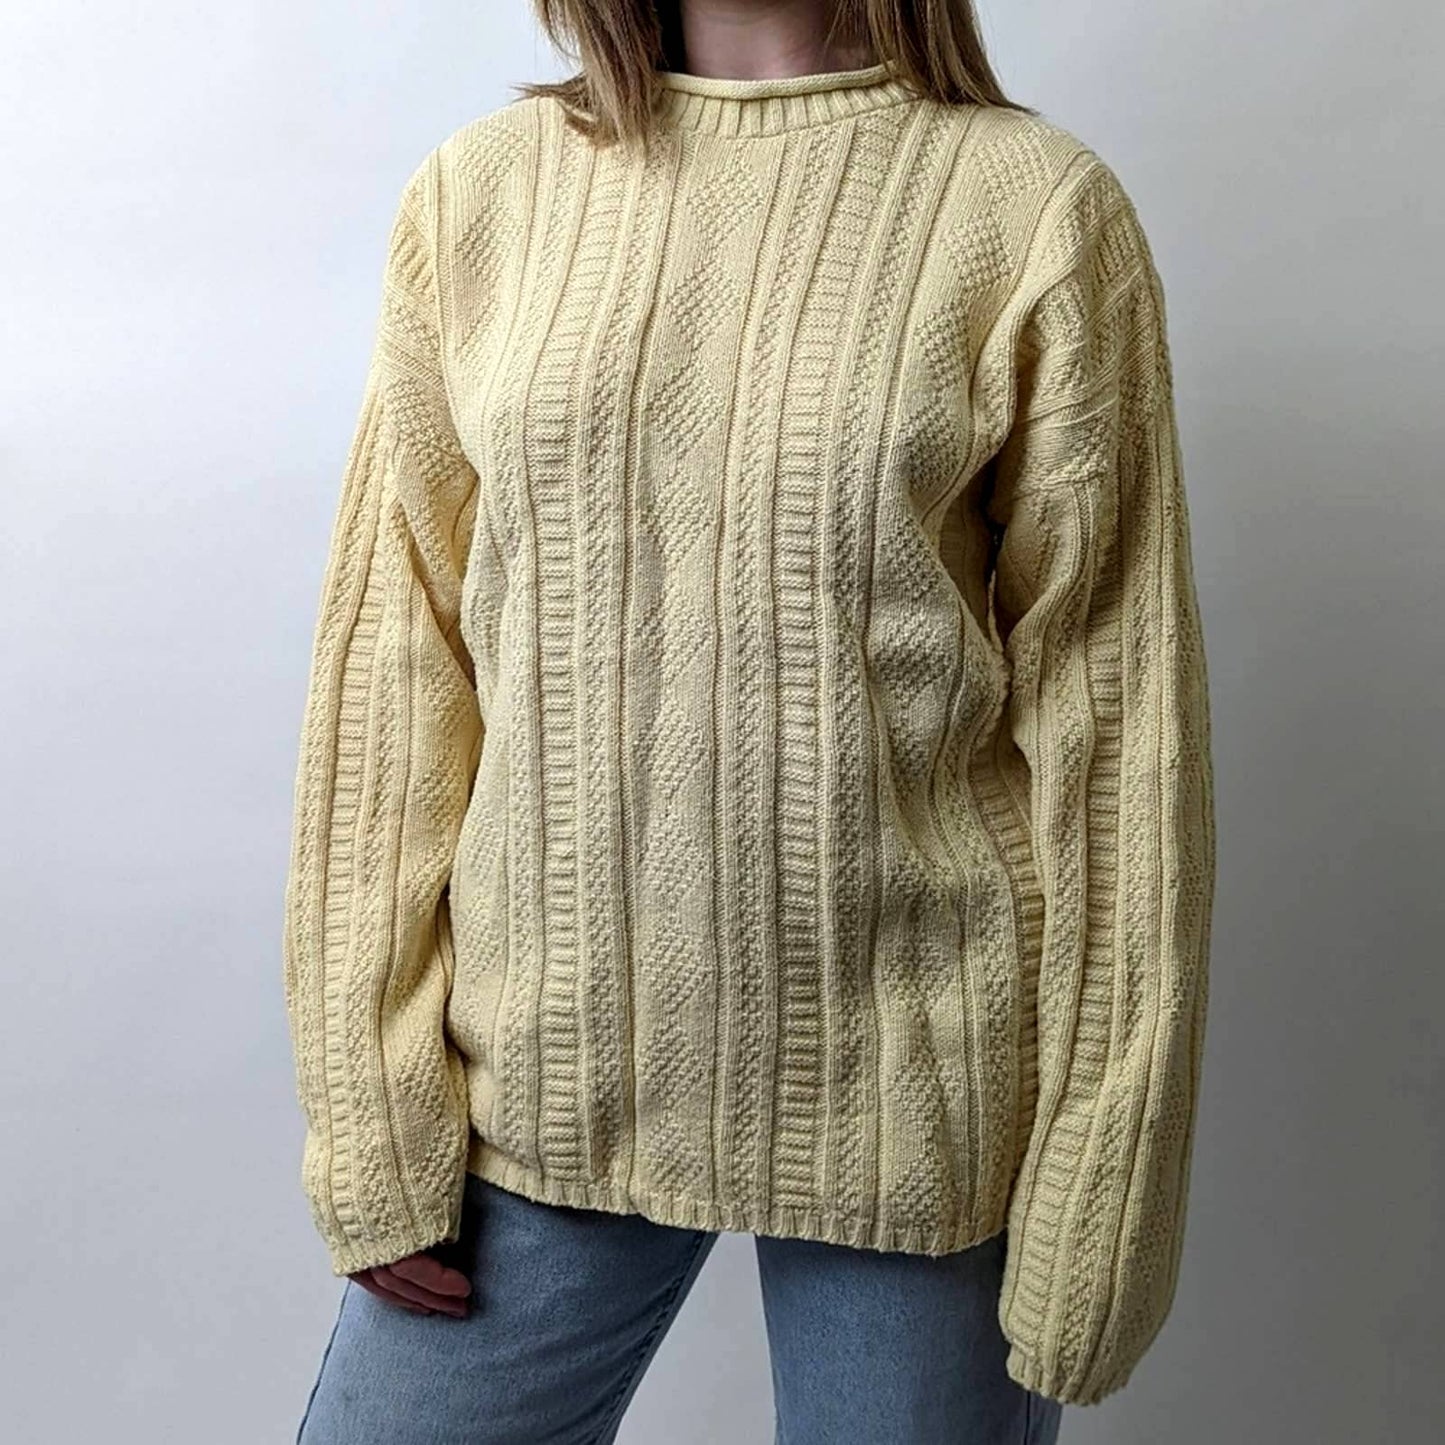 Vintage 90s Cable Knit Chunky Fisherman's Sweater - M